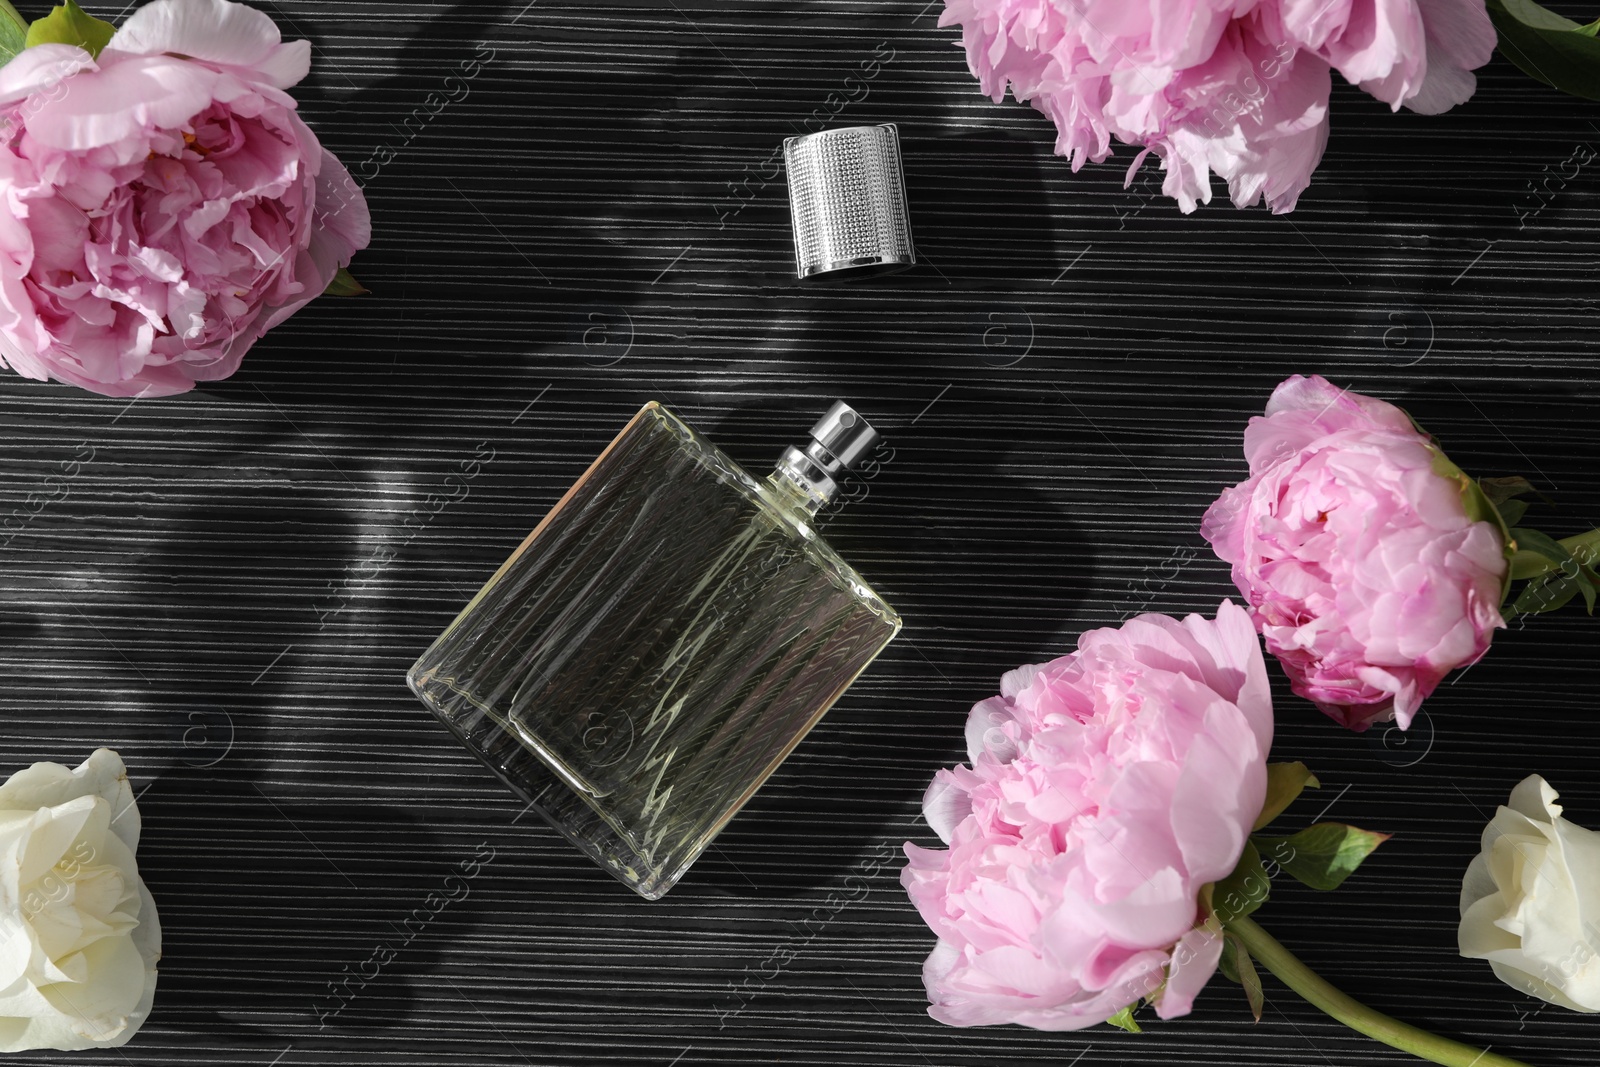 Photo of Luxury perfume and floral decor on dark background, flat lay